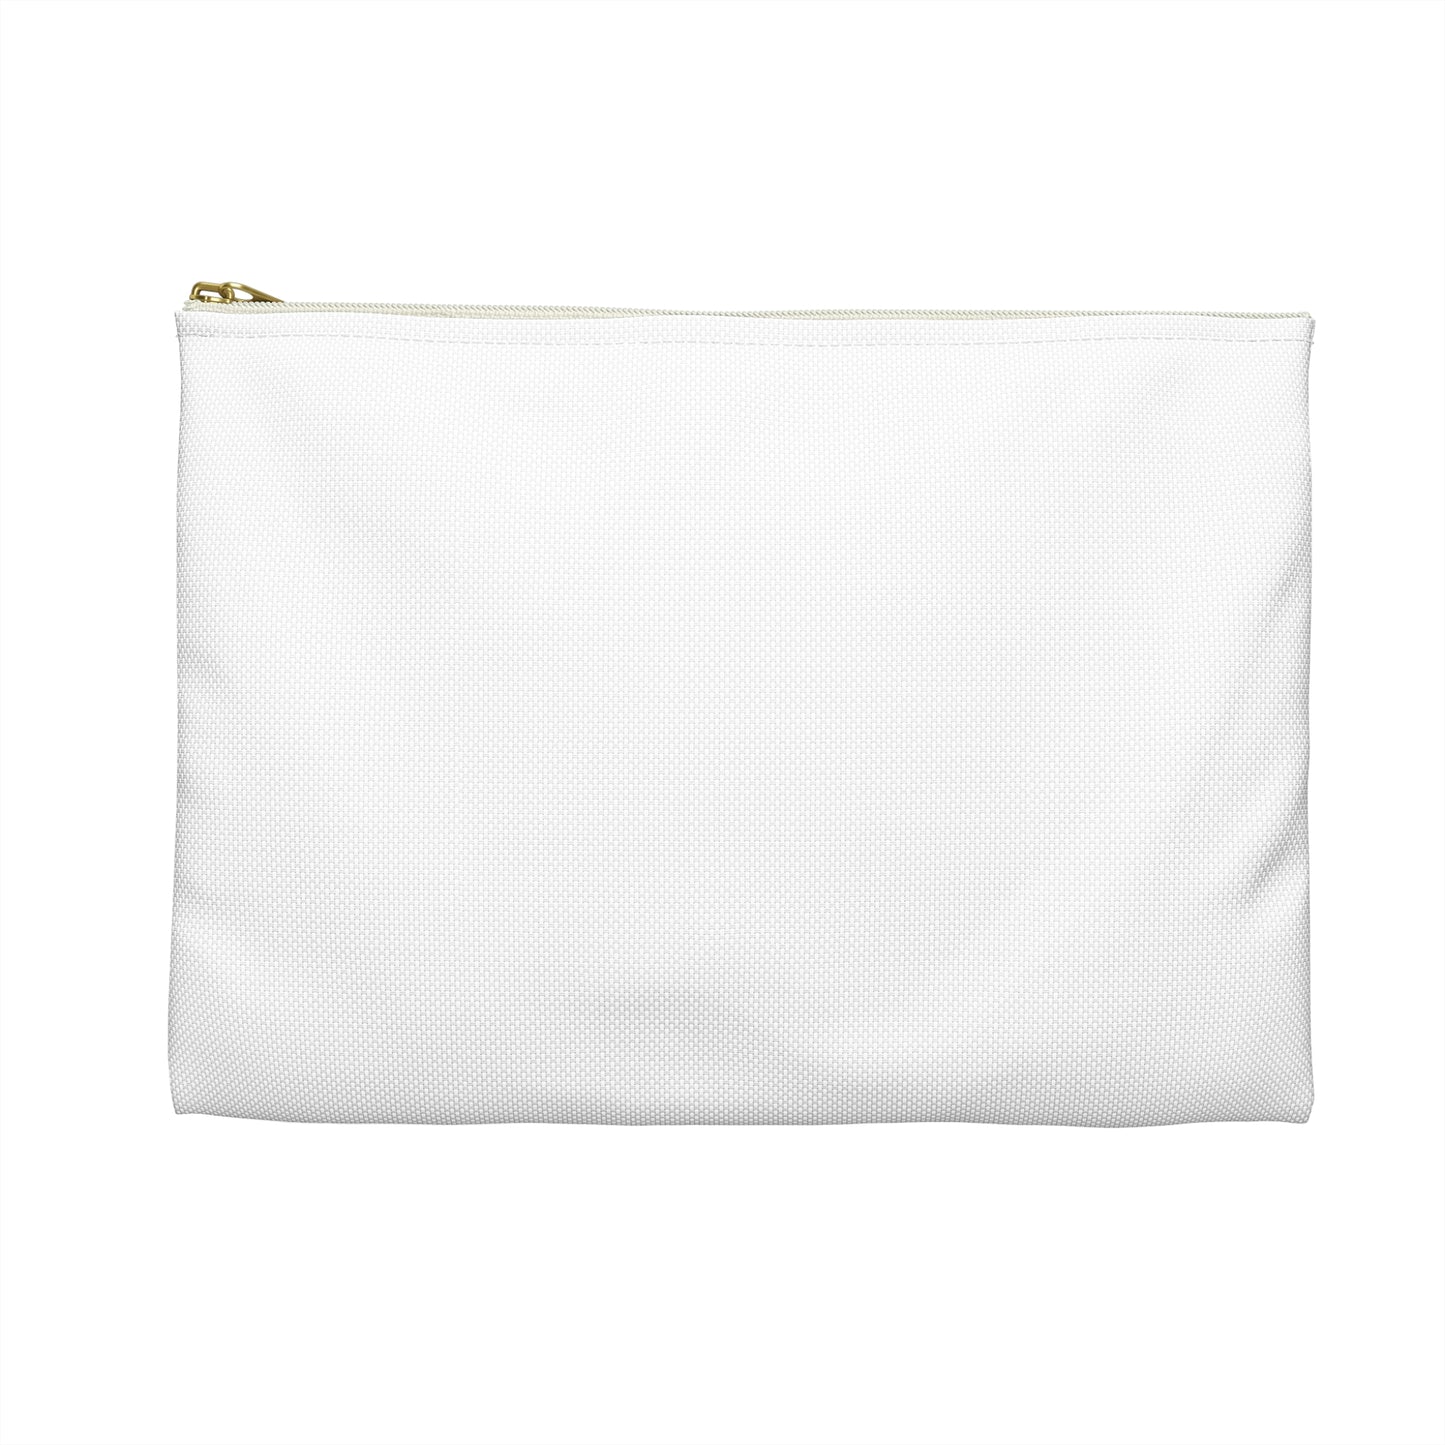 The Invincibles Team Two Accessory Pouch